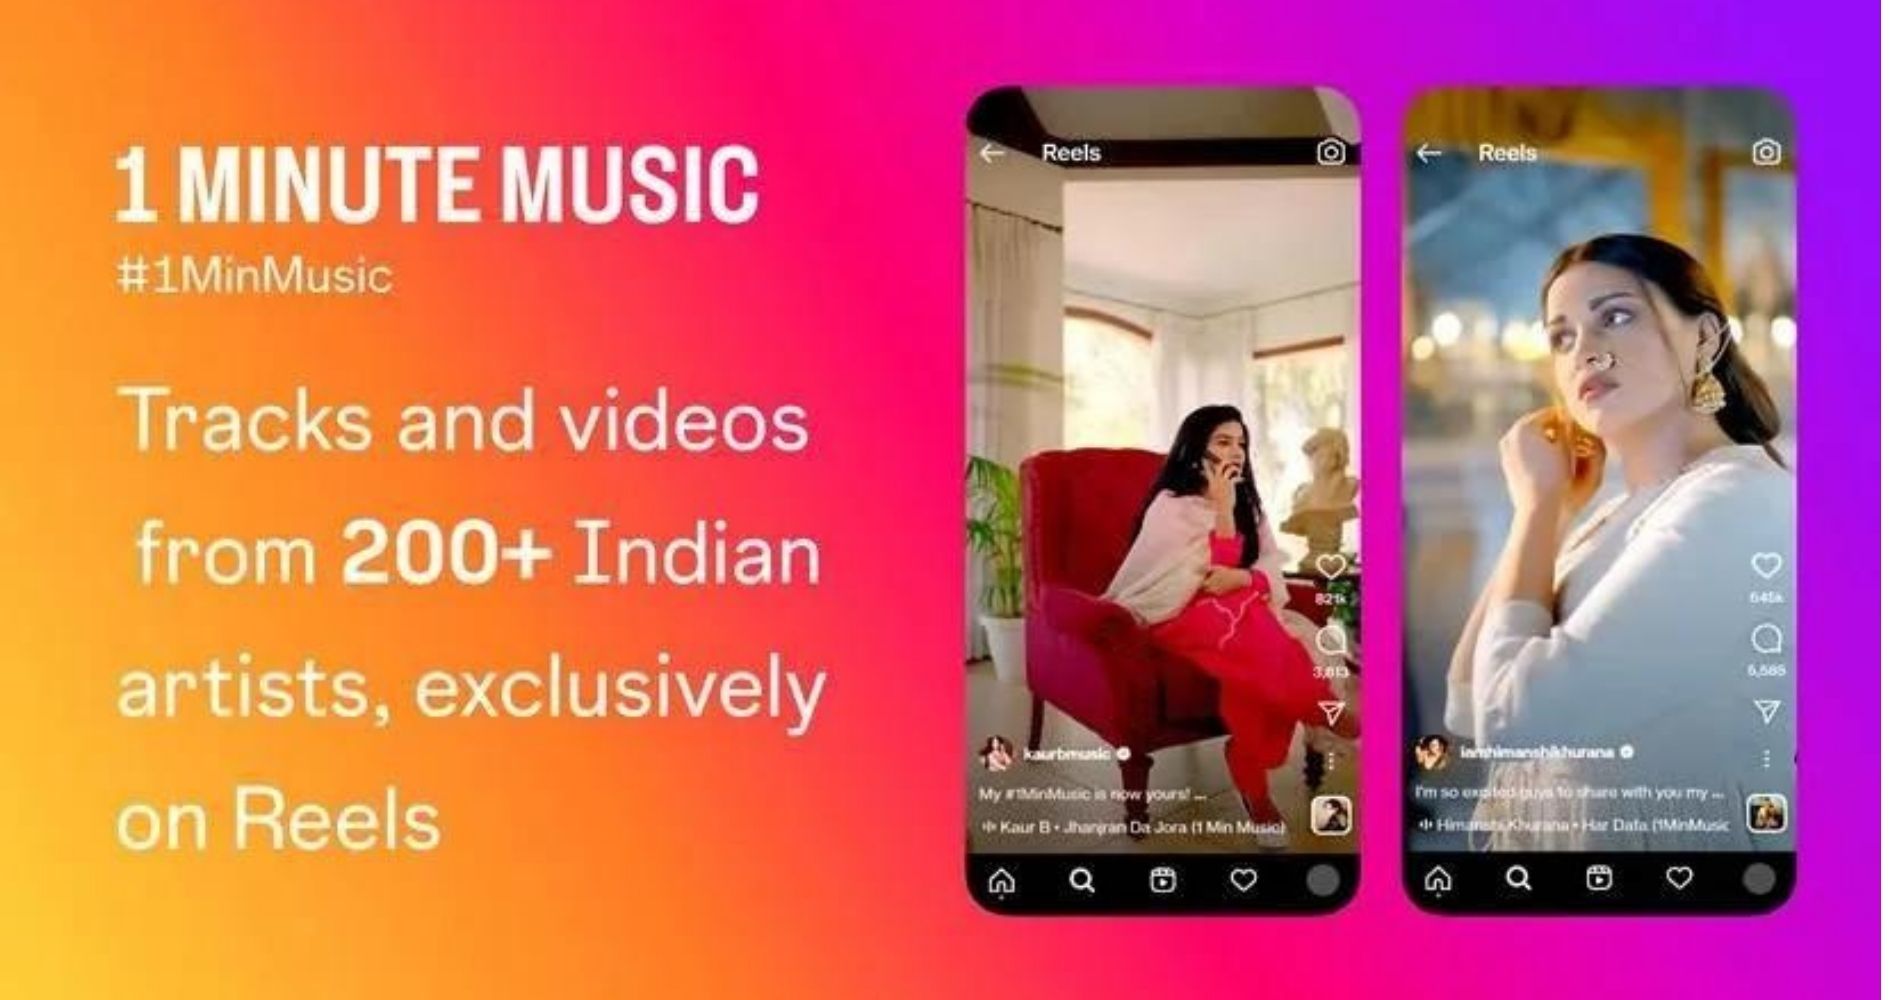 Instagram collaborates with over 200 Indian artists for a new